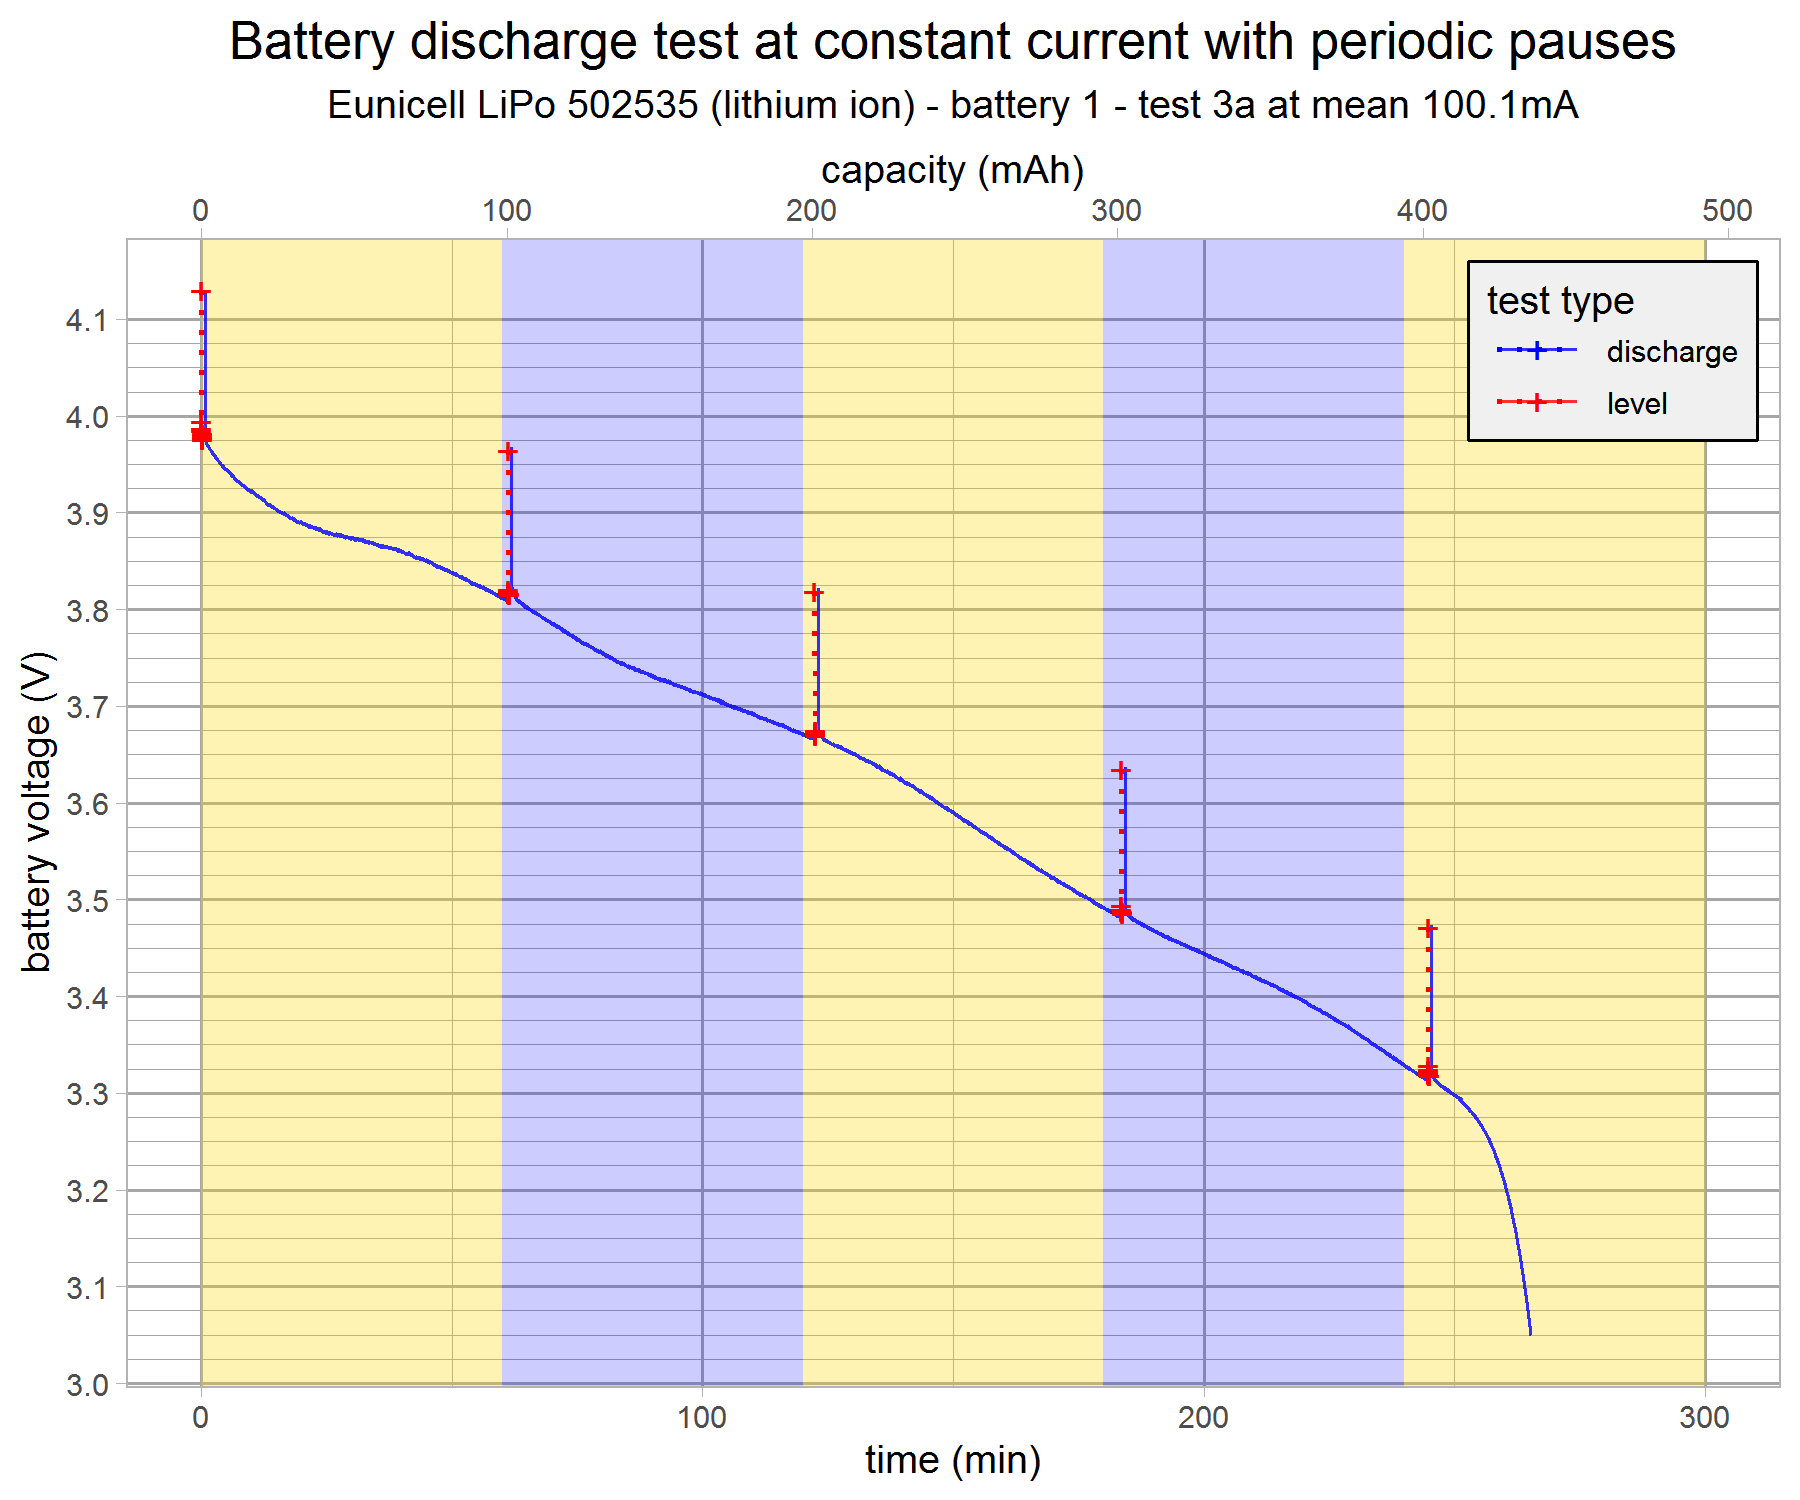 battery-discharge-test-eunicell-b1-3a-v9-g7.png